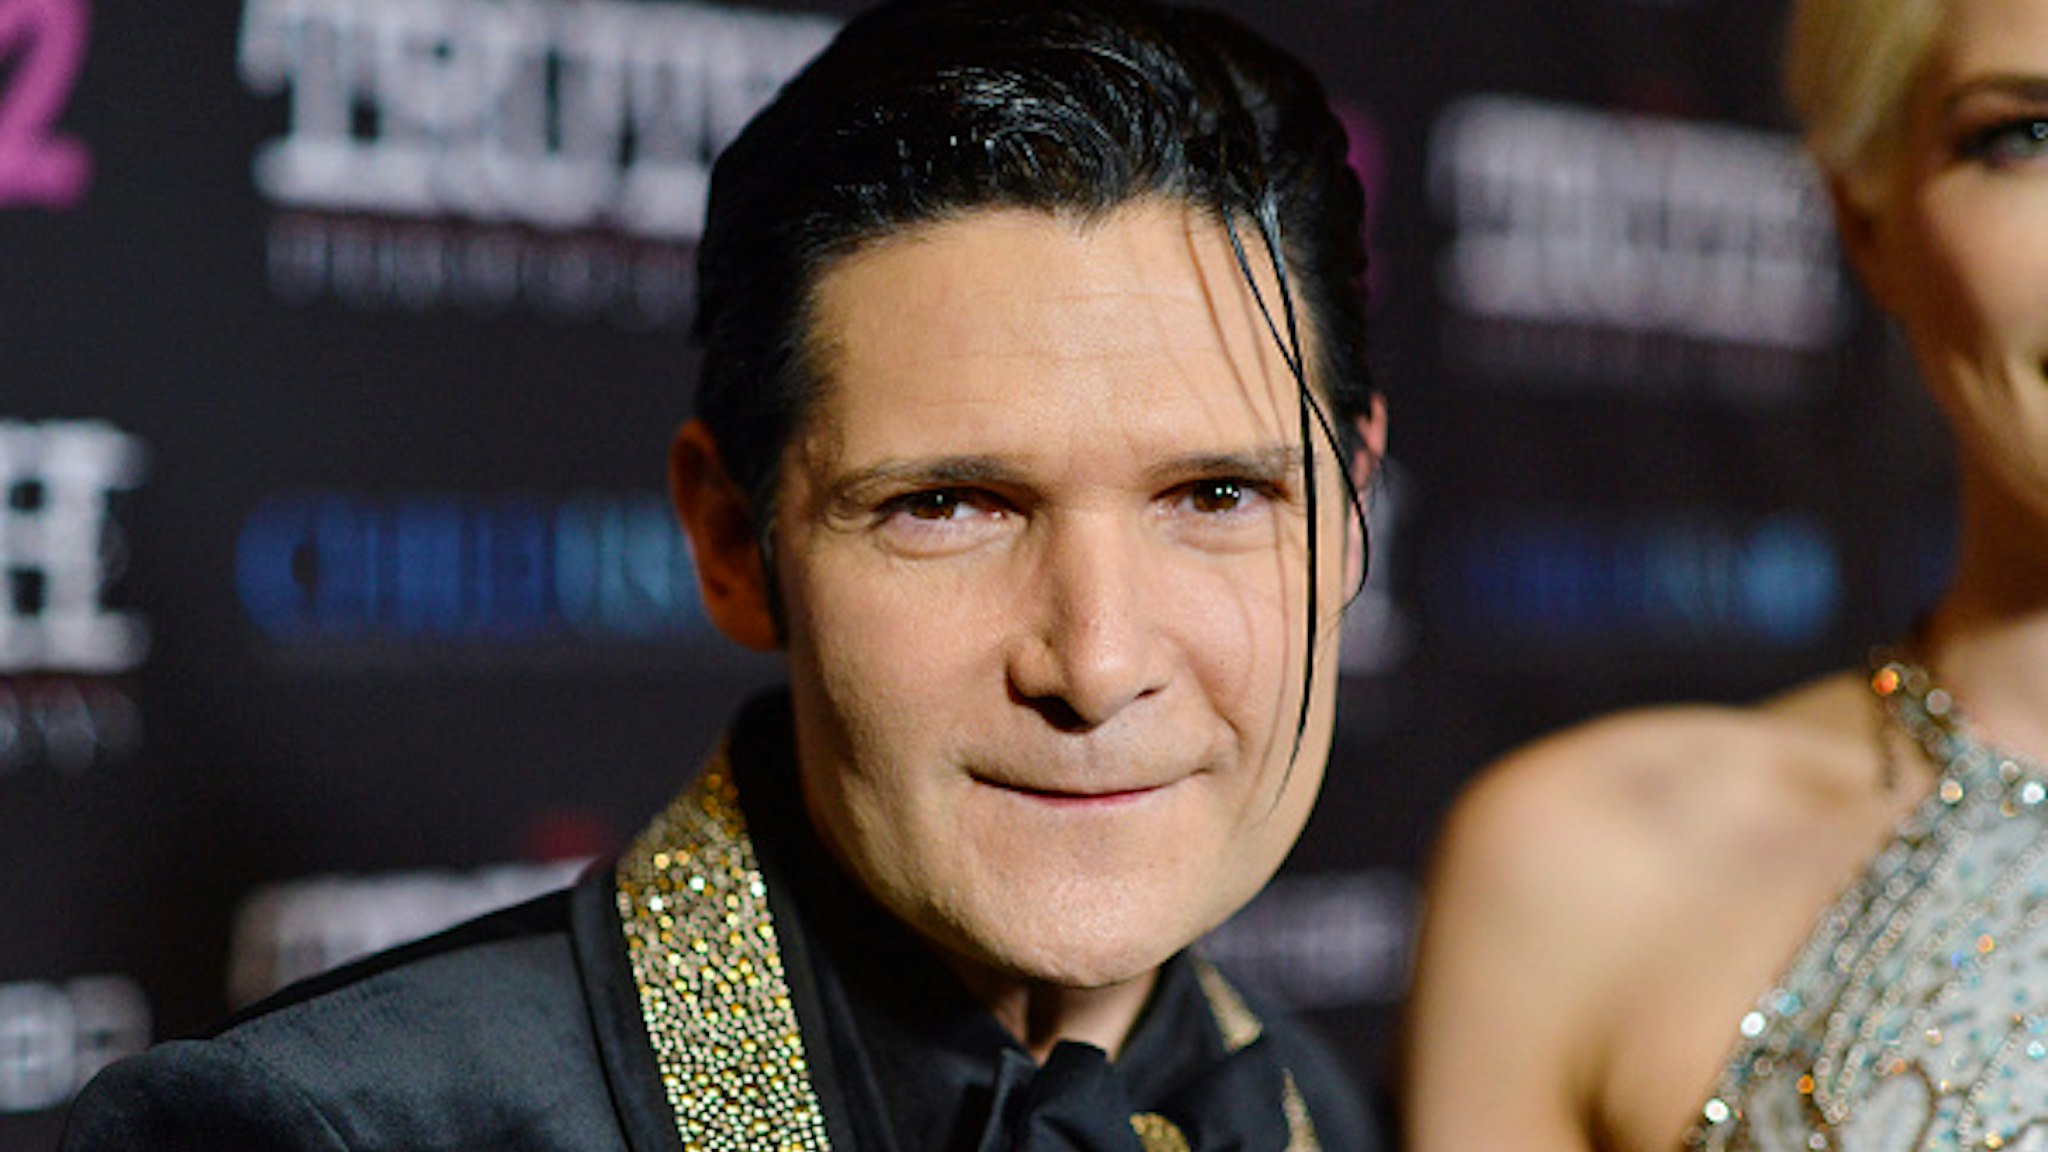 LOS ANGELES, CALIFORNIA - MARCH 09: Corey Feldman attends the Premiere of 'My Truth: The Rape Of Two Coreys' at Directors Guild Of America on March 09, 2020 in Los Angeles, California.